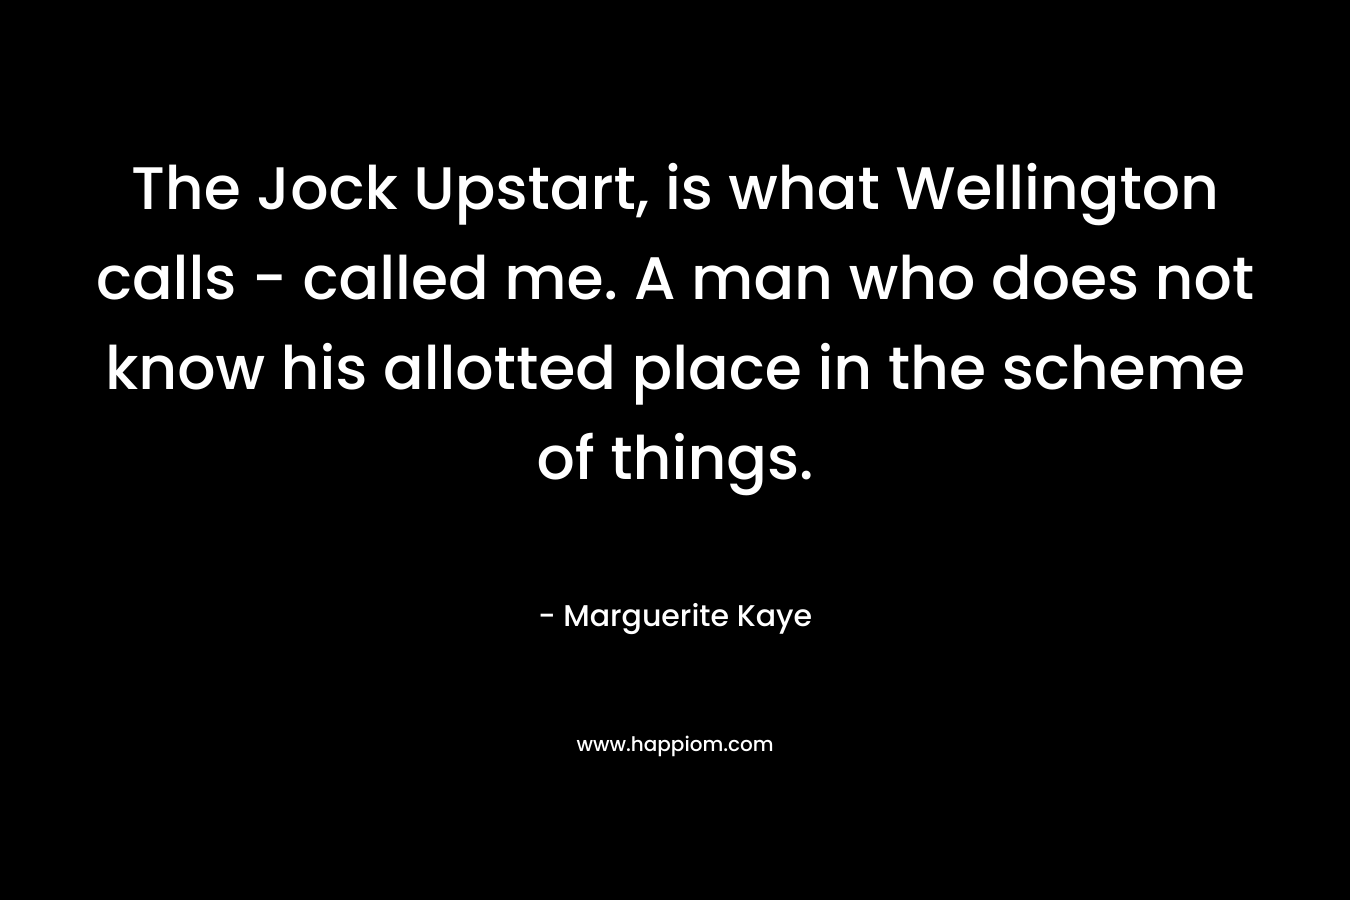 The Jock Upstart, is what Wellington calls – called me. A man who does not know his allotted place in the scheme of things. – Marguerite Kaye